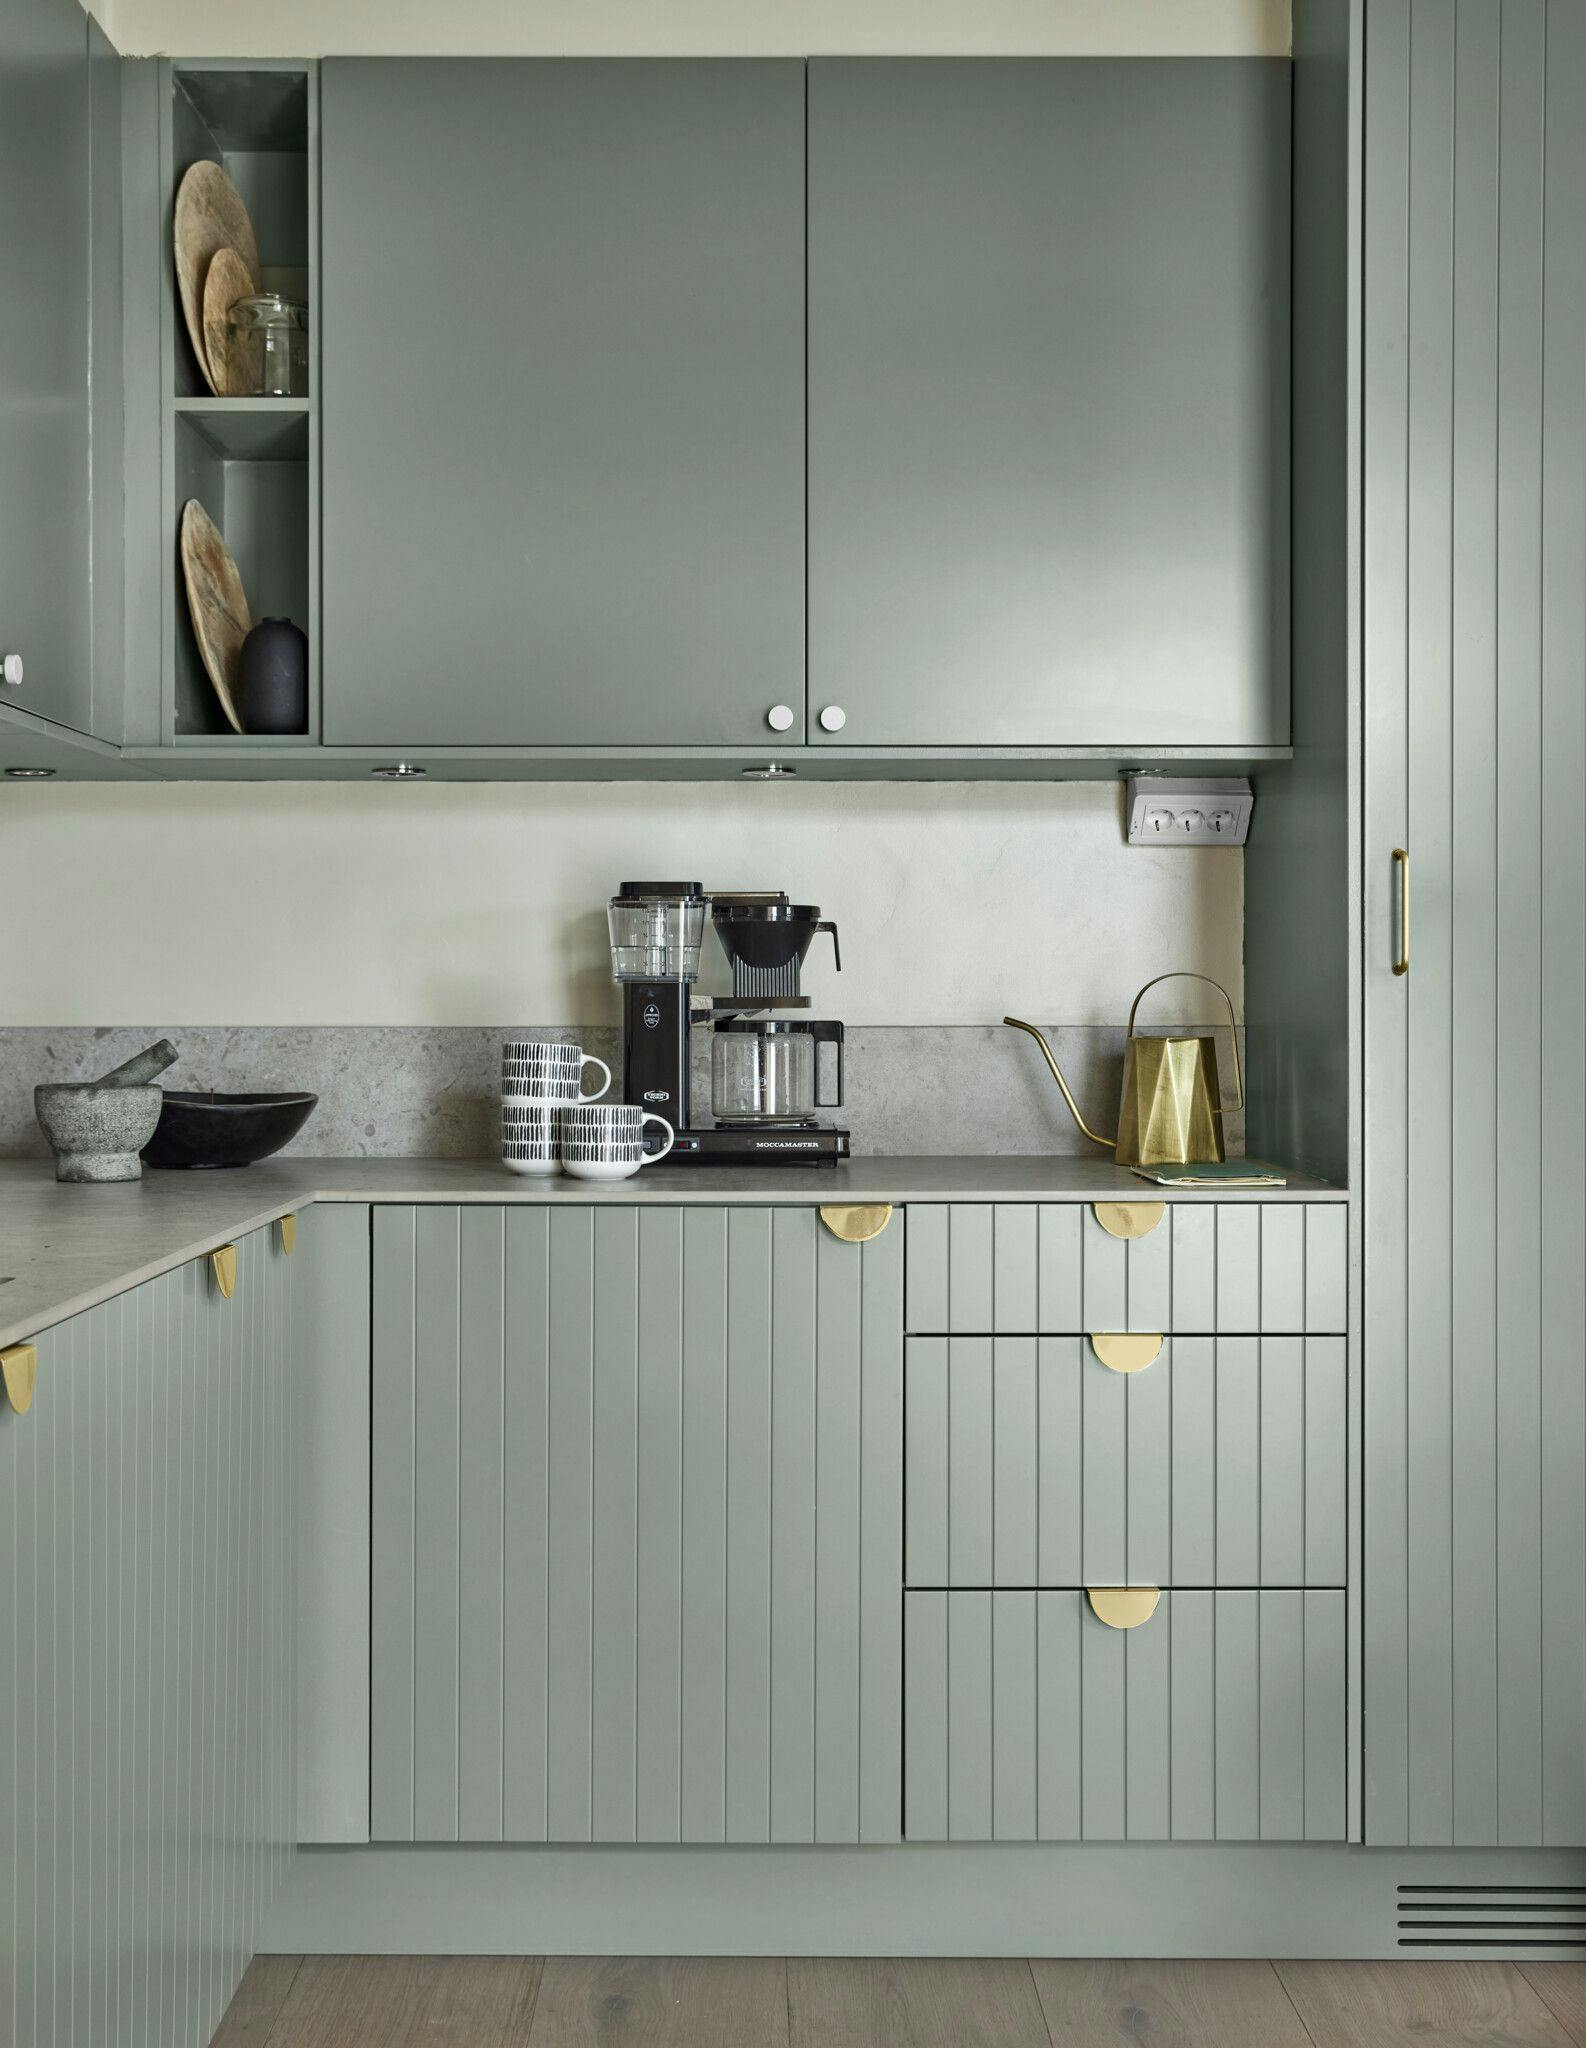 Kitchen with knobs and handles